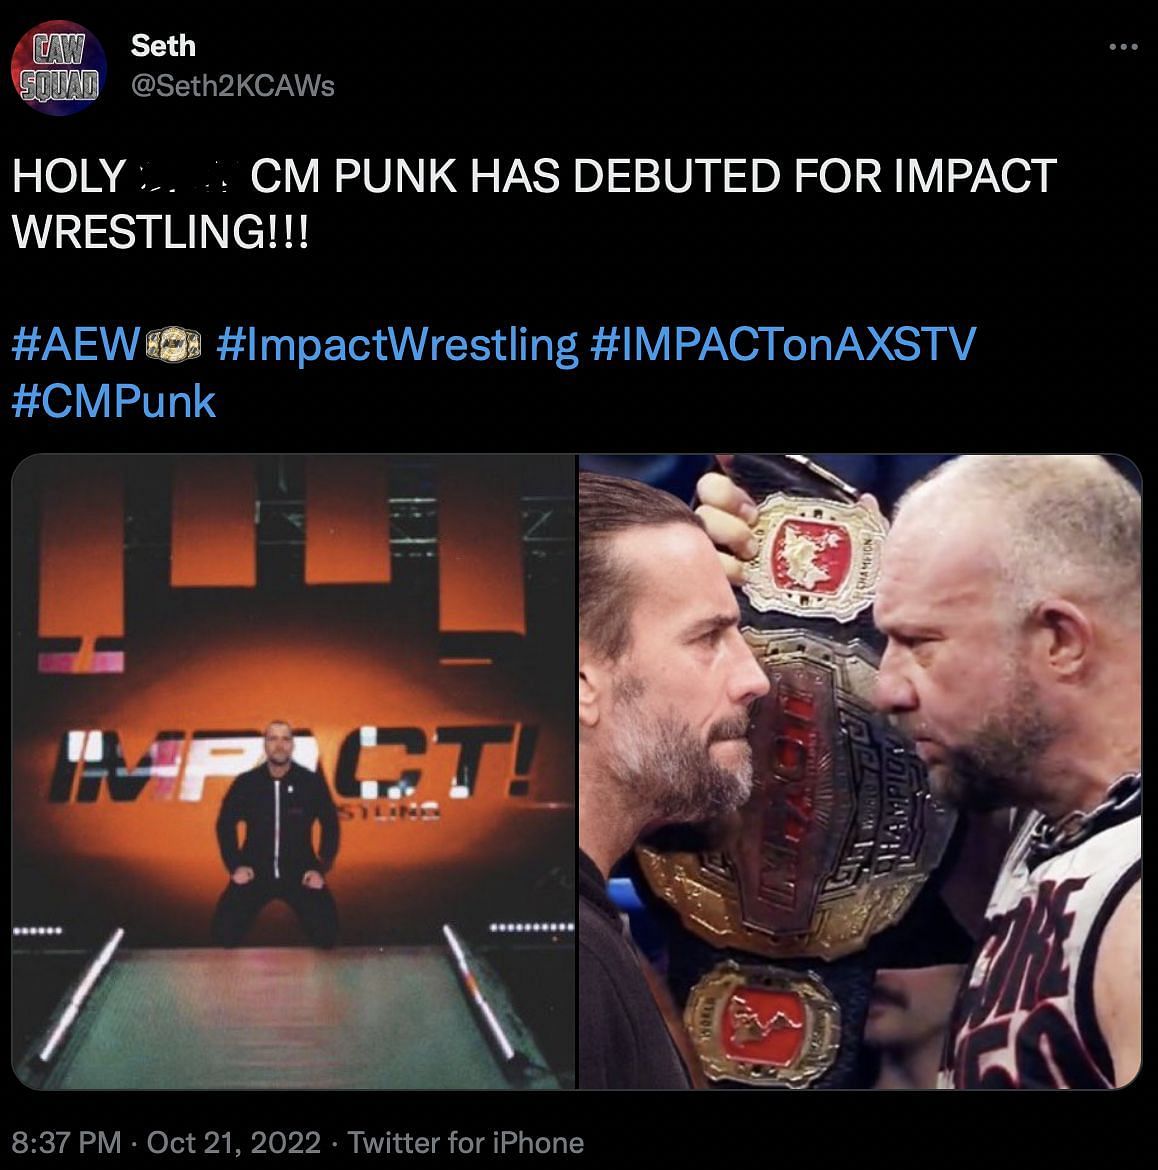 Fan claiming about CM Punk already making IMPACT debut